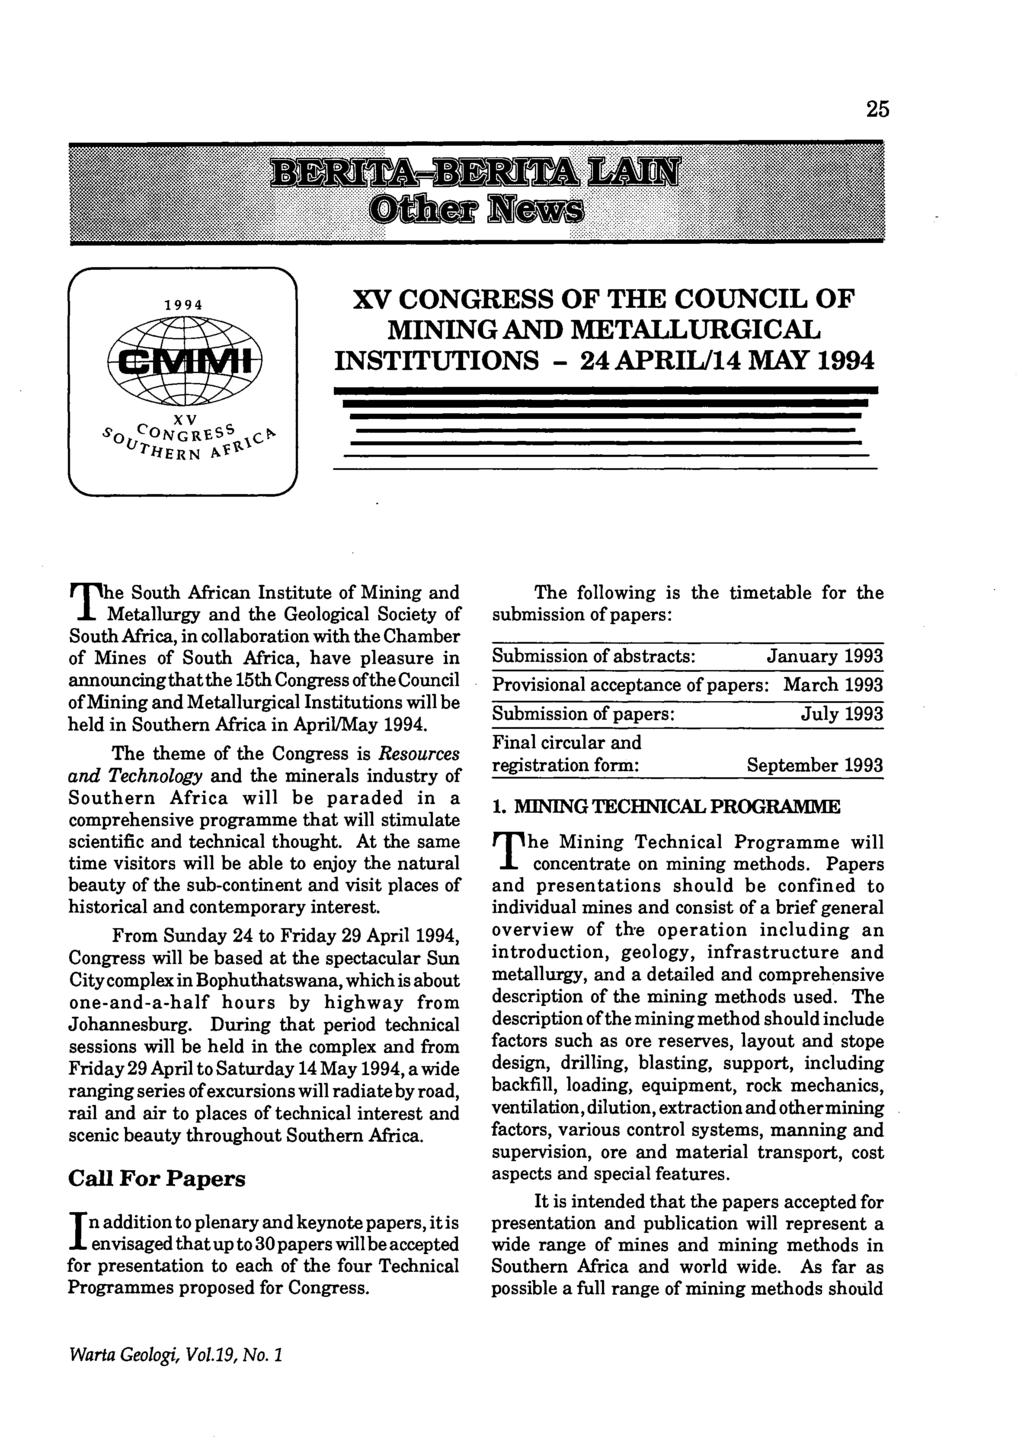 25 1994 xv CONGRESS OF THE COUNCIL OF MINING AND METALLURGICAL INSTITUTIONS - 24APRILl14 MAY 1994 The South African Institute of Mining and Metallurgy and the Geological Society of South Africa, in